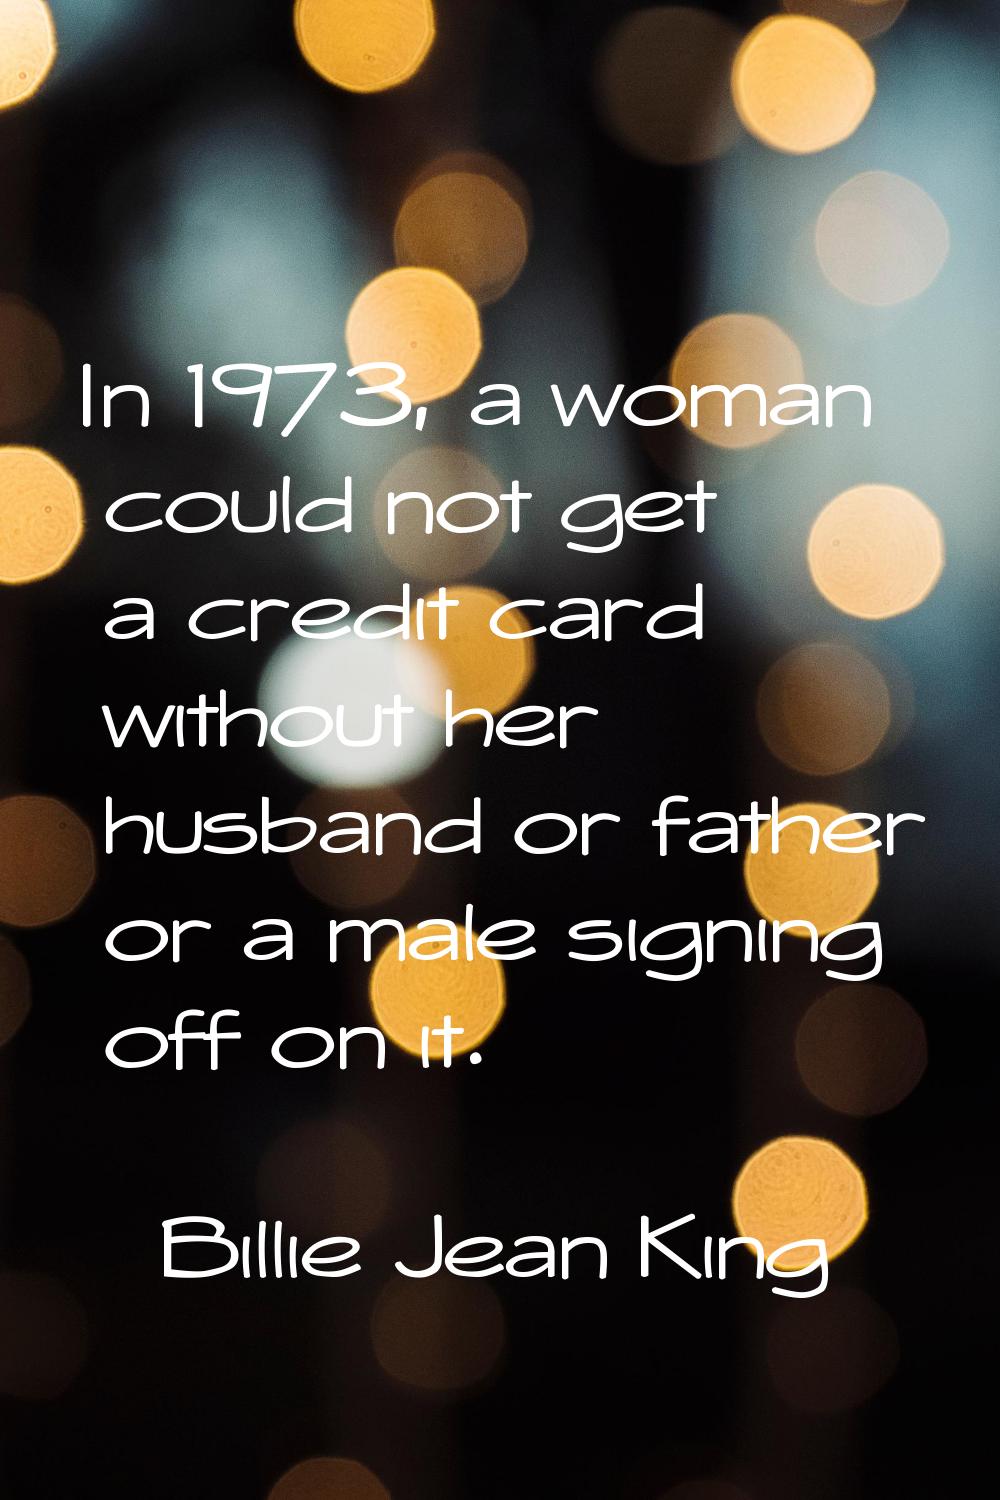 In 1973, a woman could not get a credit card without her husband or father or a male signing off on